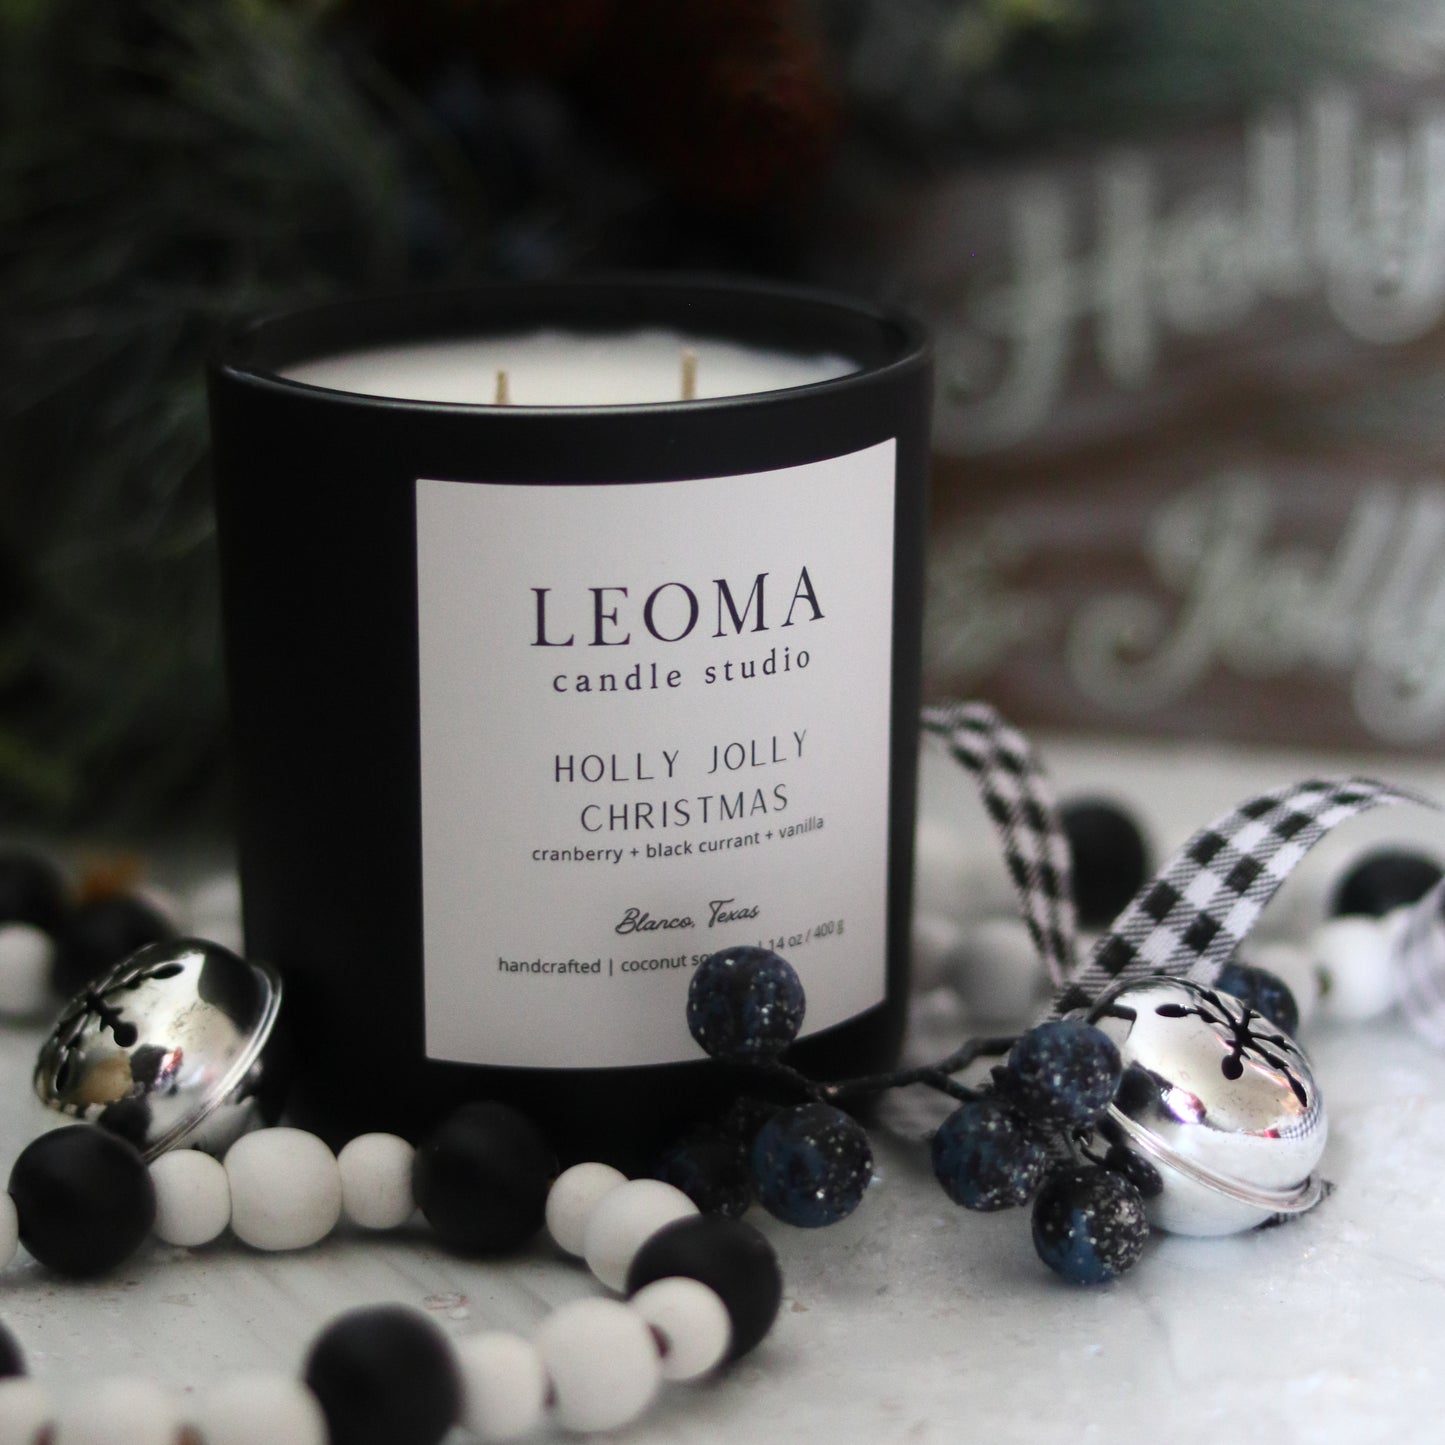 Handcrafted eco-friendly scented candle. Natural coconut & soy wax, toxin-free, 100% cotton wicks. Black vessel. Holly Jolly Christmas scented.